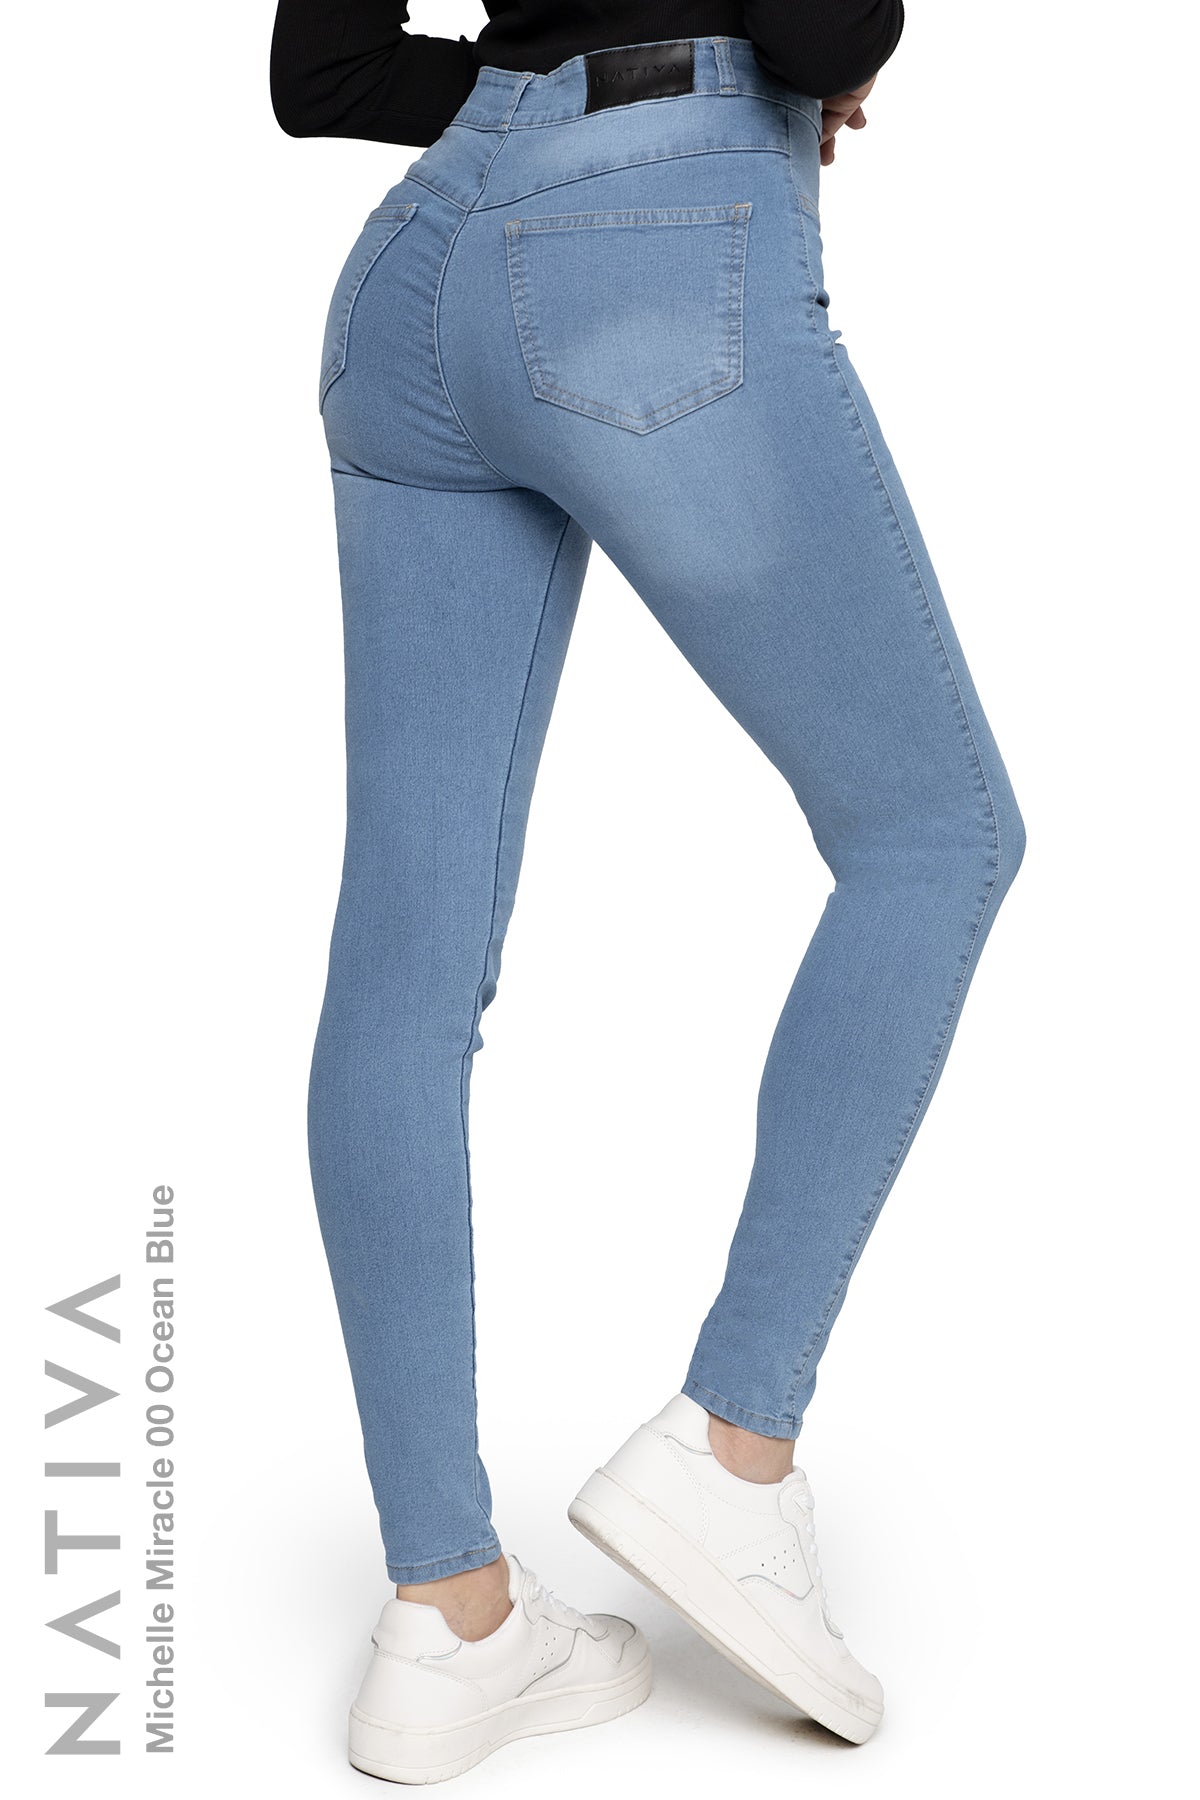 Shaping NATIVA, OCEAN Ca MIRACLE High JEANS. 00 BLUE, MICHELLE STRETCH